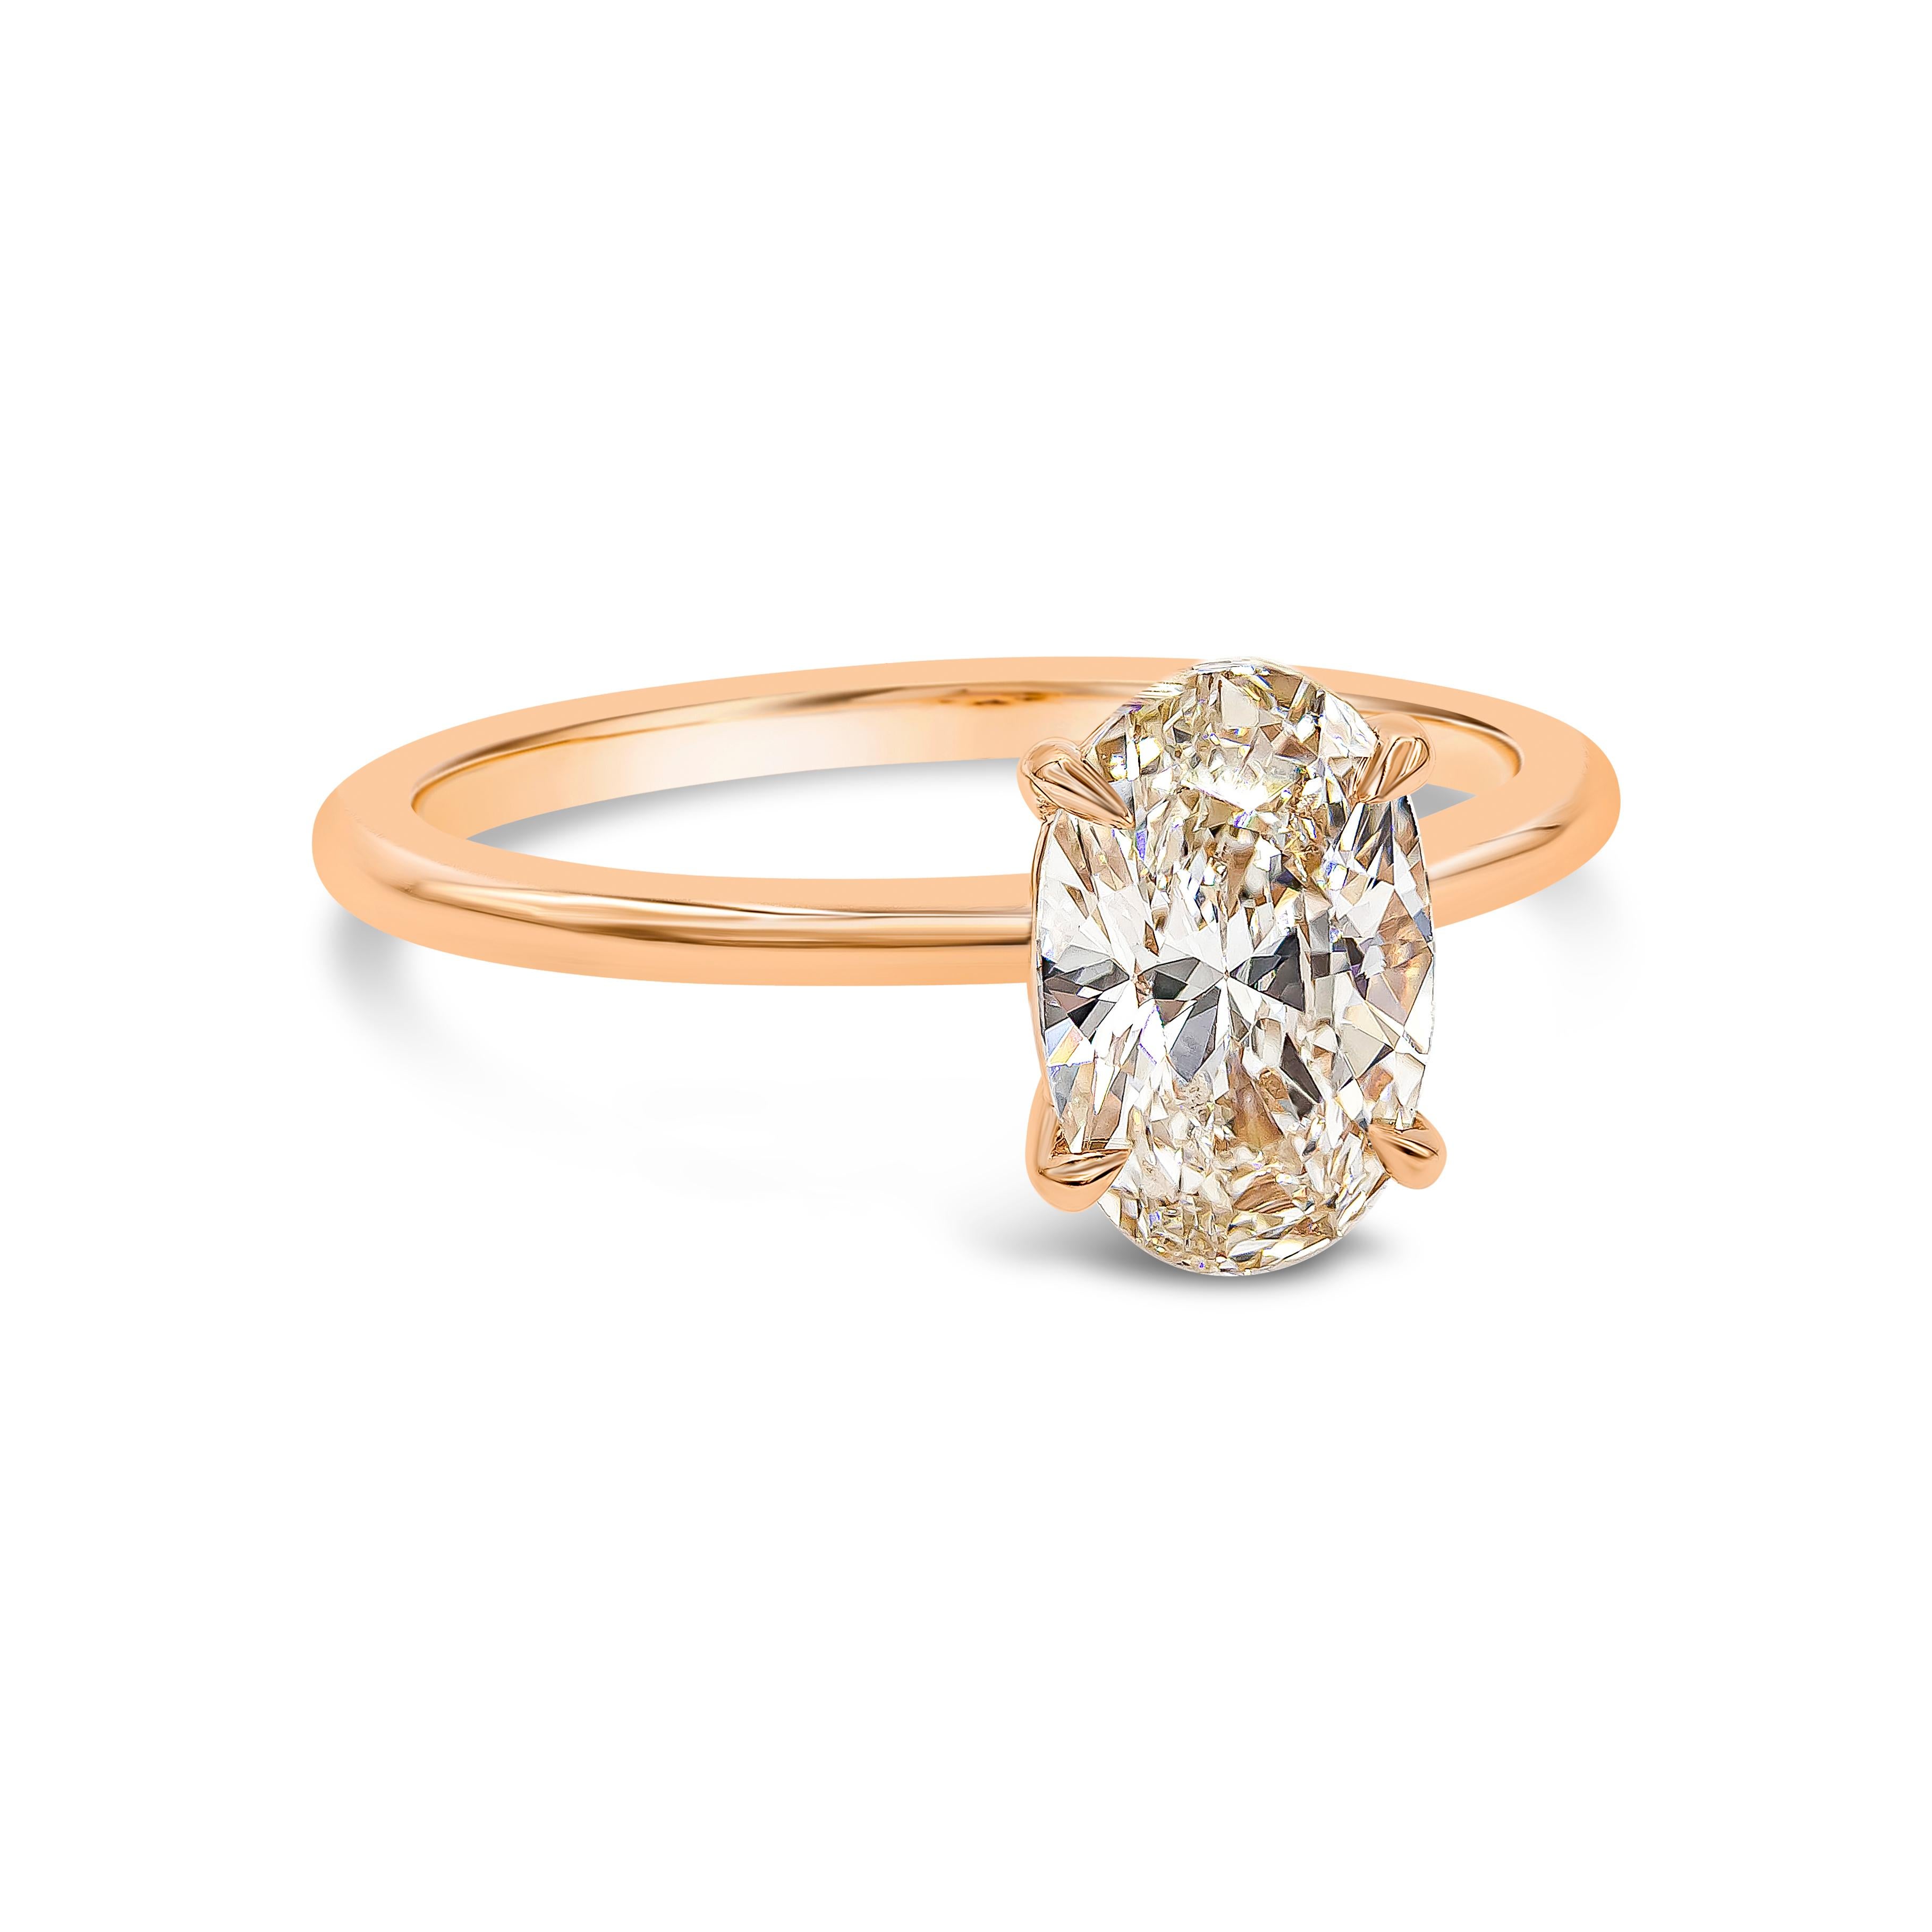 A classic engagement ring style showcasing a single 1.49 carat oval cut diamond, set in a traditional four-prong setting made in 18k rose gold. Size 6.5 US.

Style available in different price ranges. Prices are based on your selection. Please